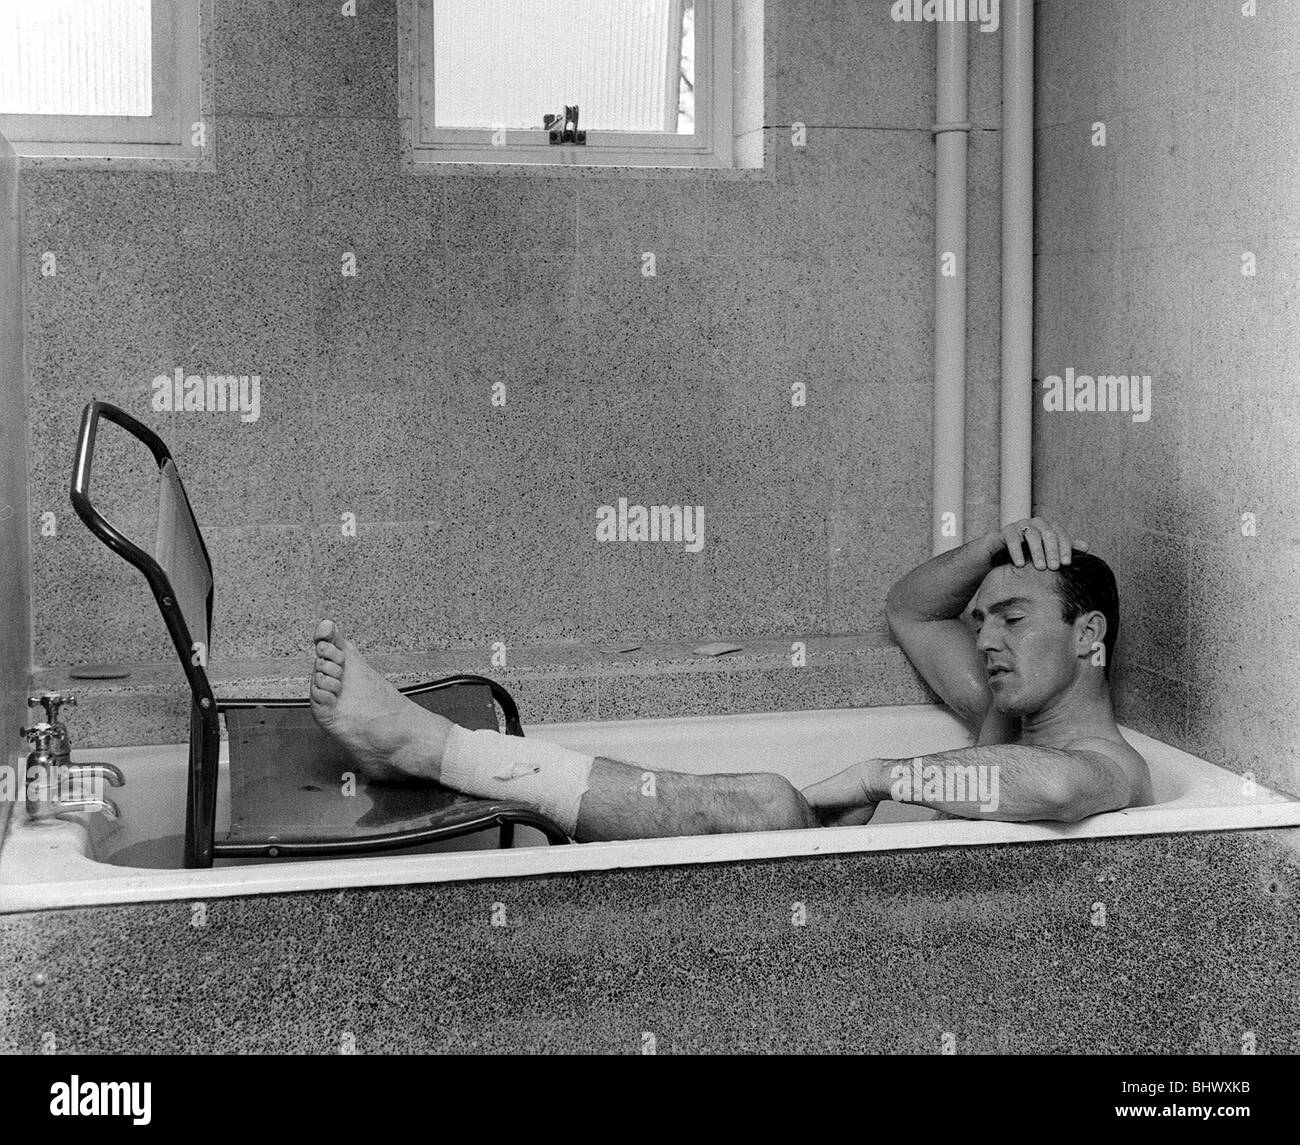 jimmy-greave-football-player-july-1966-world-cup-1966-jimmy-relaxes-BHWXKB.jpg